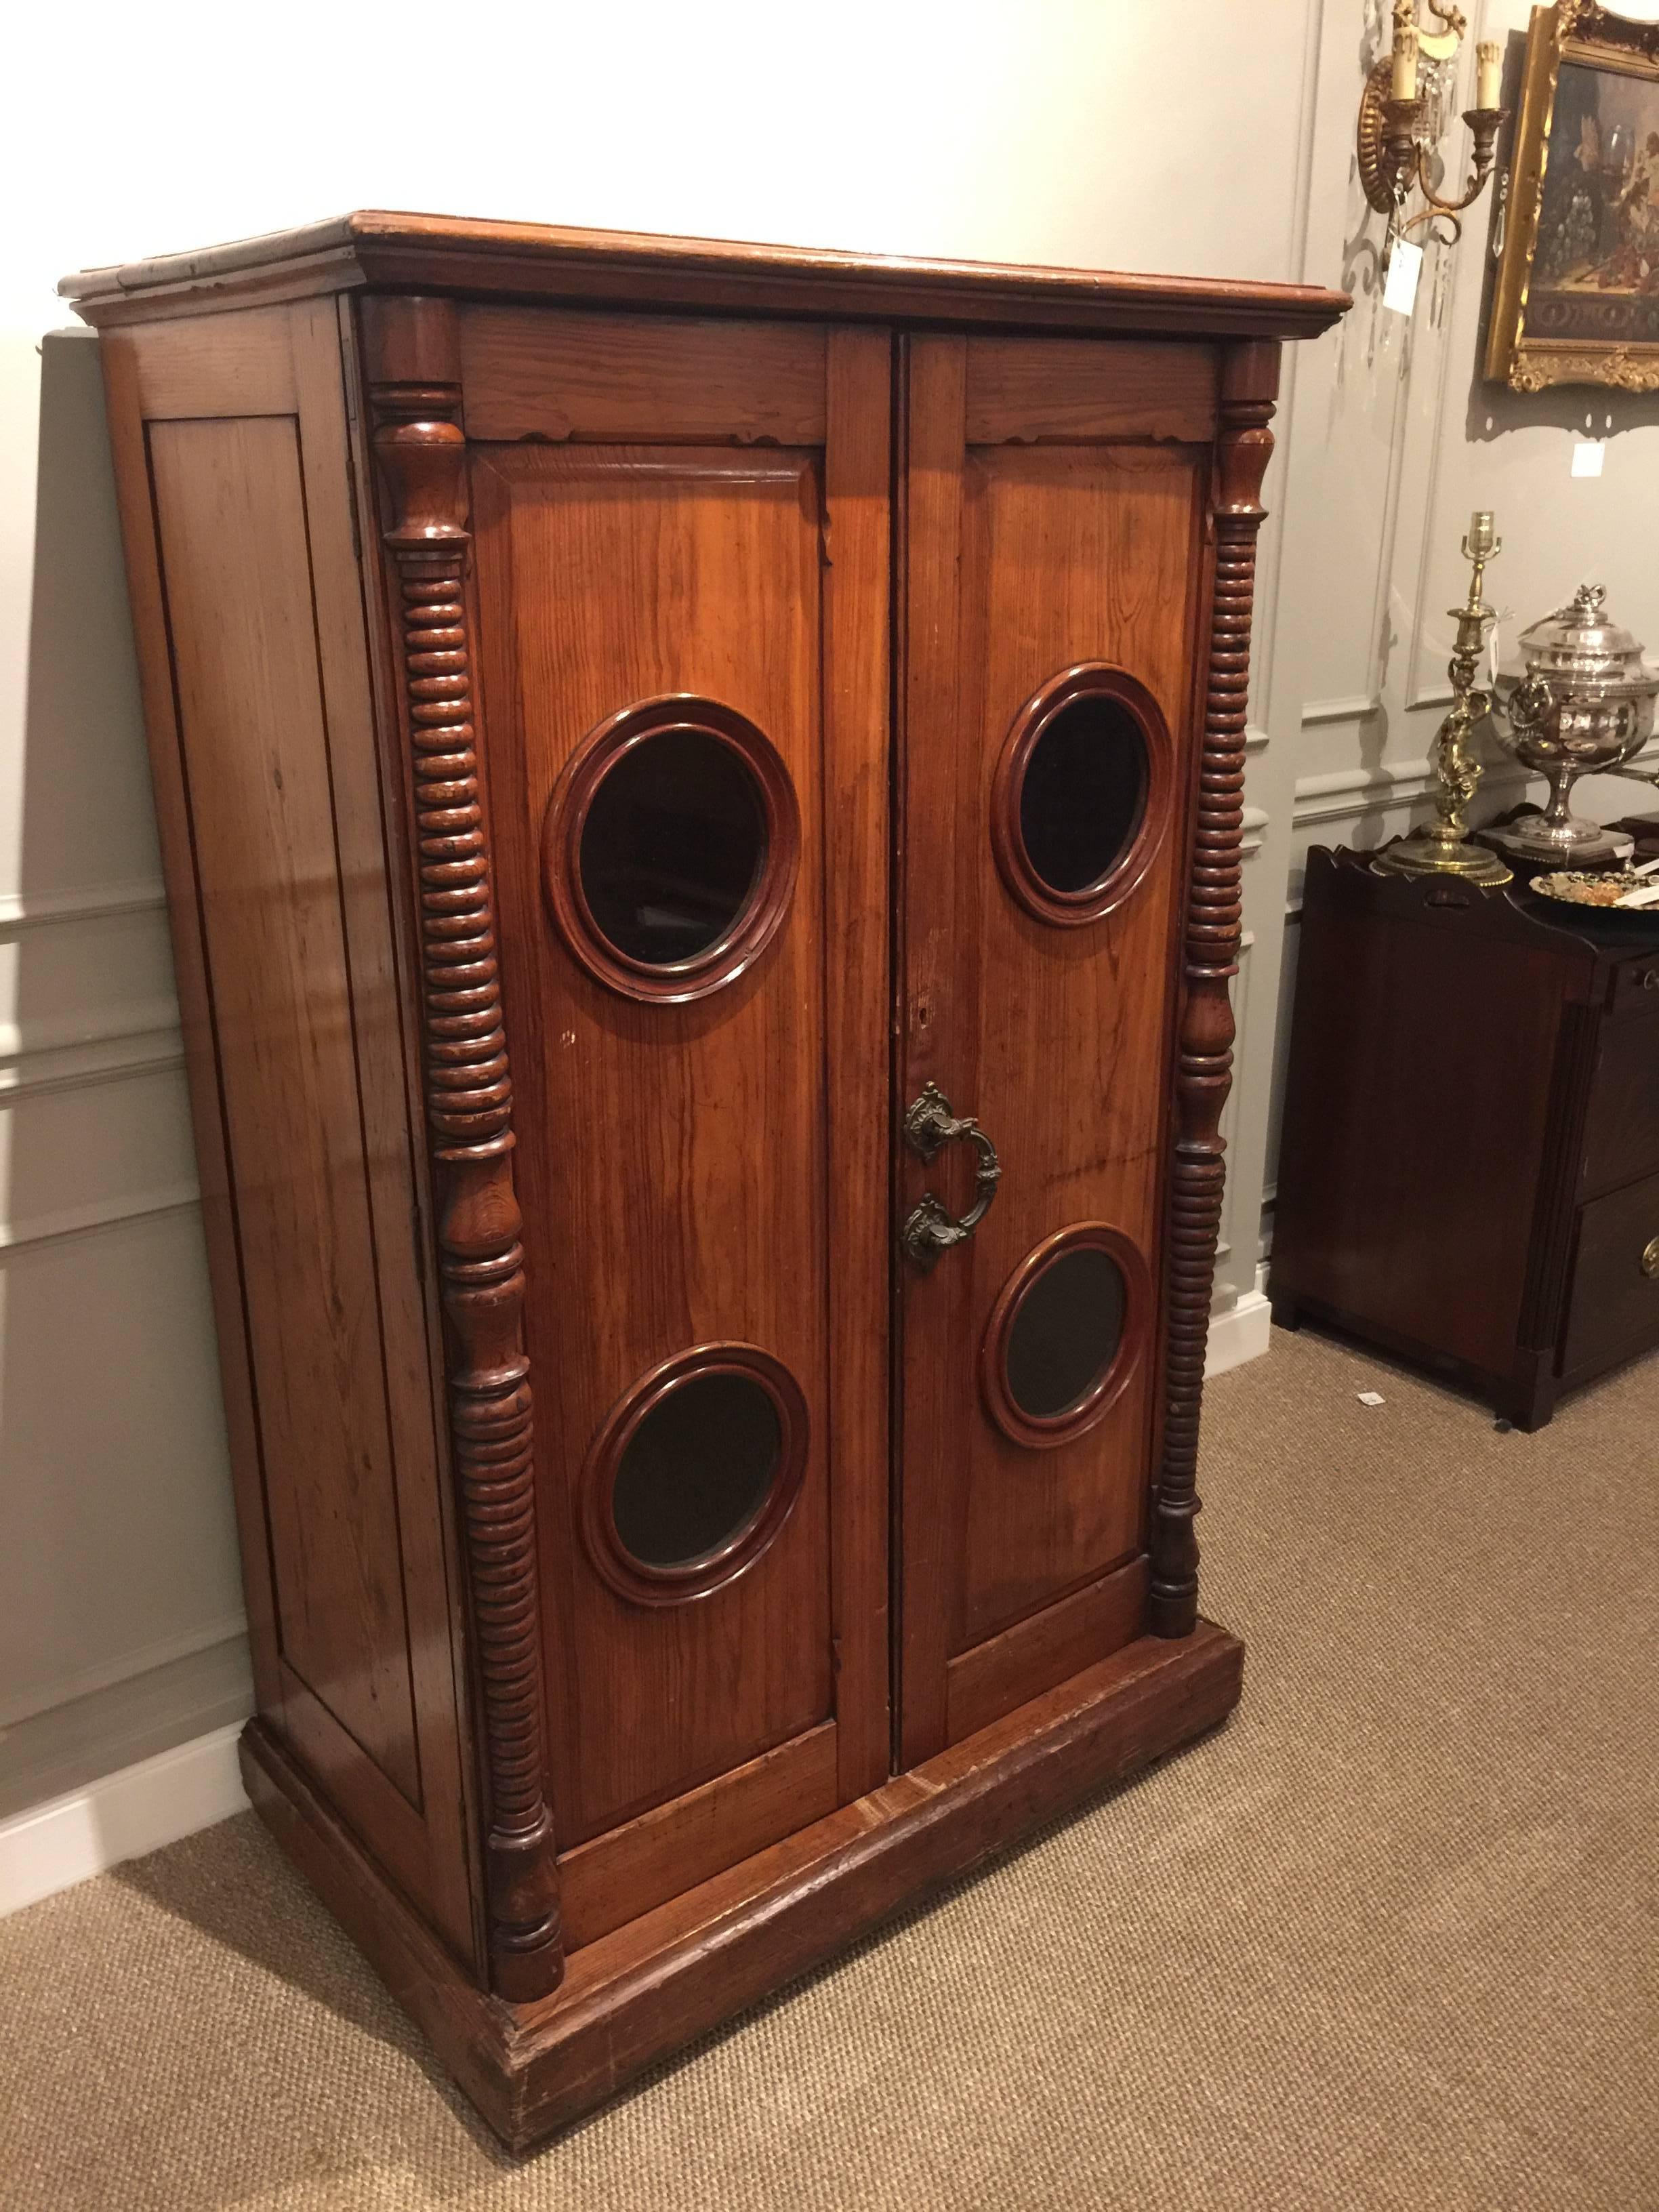 19th century Yacht cabinet, a rare find of antique ship furniture. The rectangular top over a case with flanking turned columns and two 18 x 54 inch doors each one fitted with two 7 inch portholes and a single cast bronze swing handle. There are two